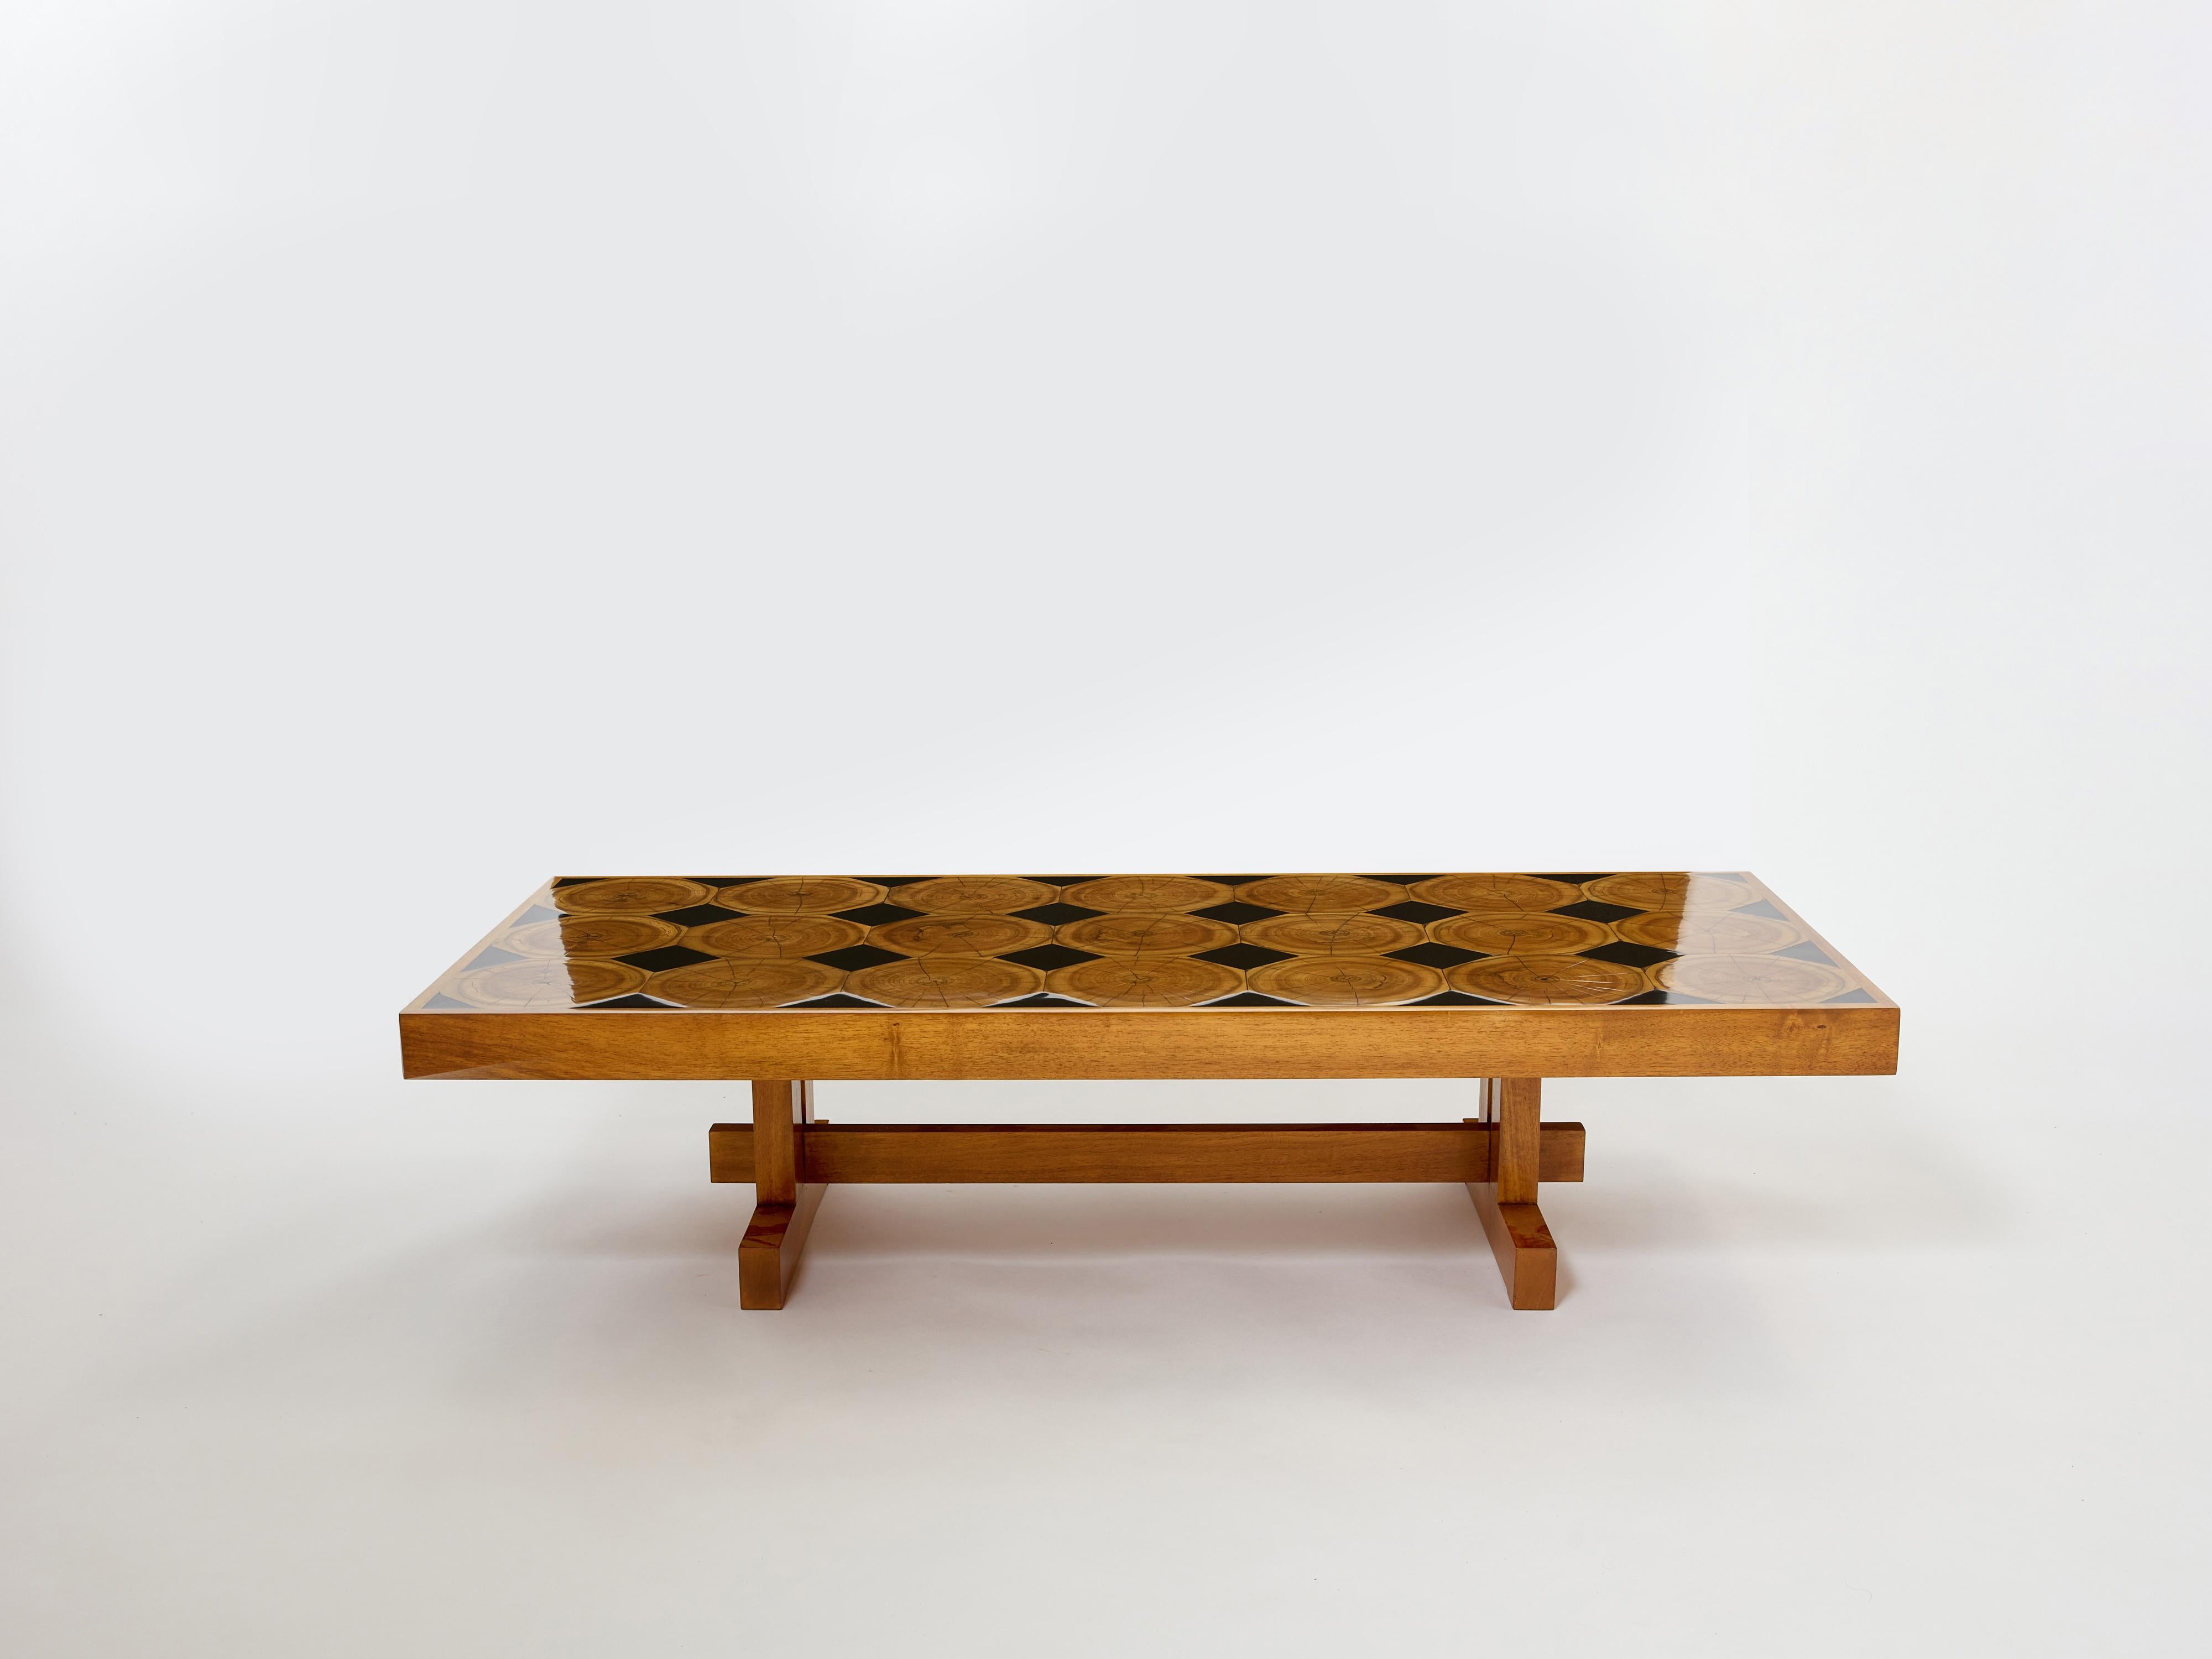 This large modernist French coffee table made in solid oak wood is sure to add an element of French brutalism to any living room. It was designed and produced in France by an unknown cabinetmaker in the 1960s. It features a large slick petrified